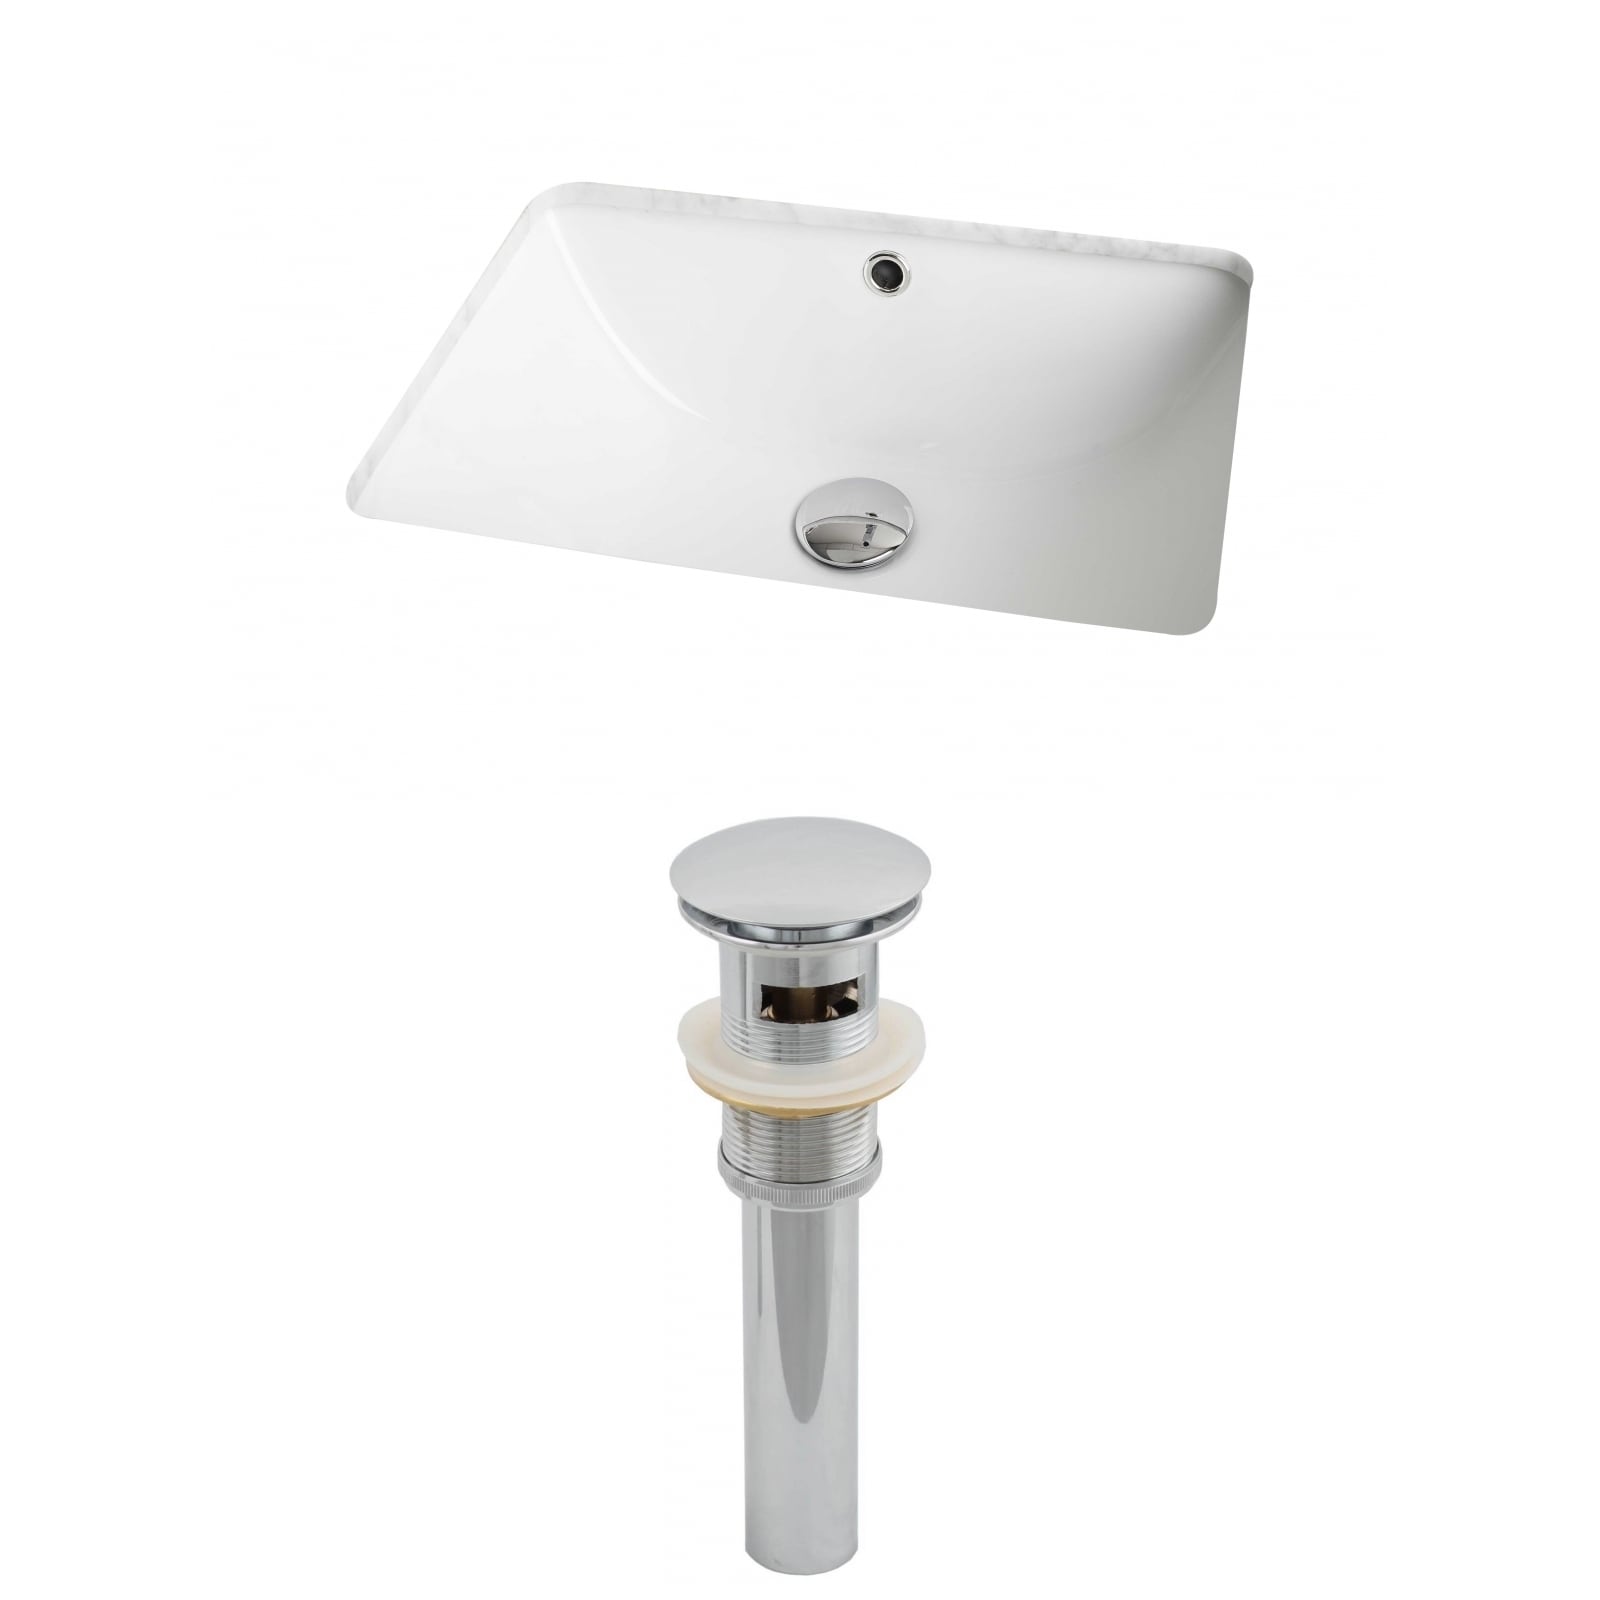 18.25-in. W x 13.5-in. D Rectangle Undermount Sink Set In White And Drain -  Bed Bath & Beyond - 12054632